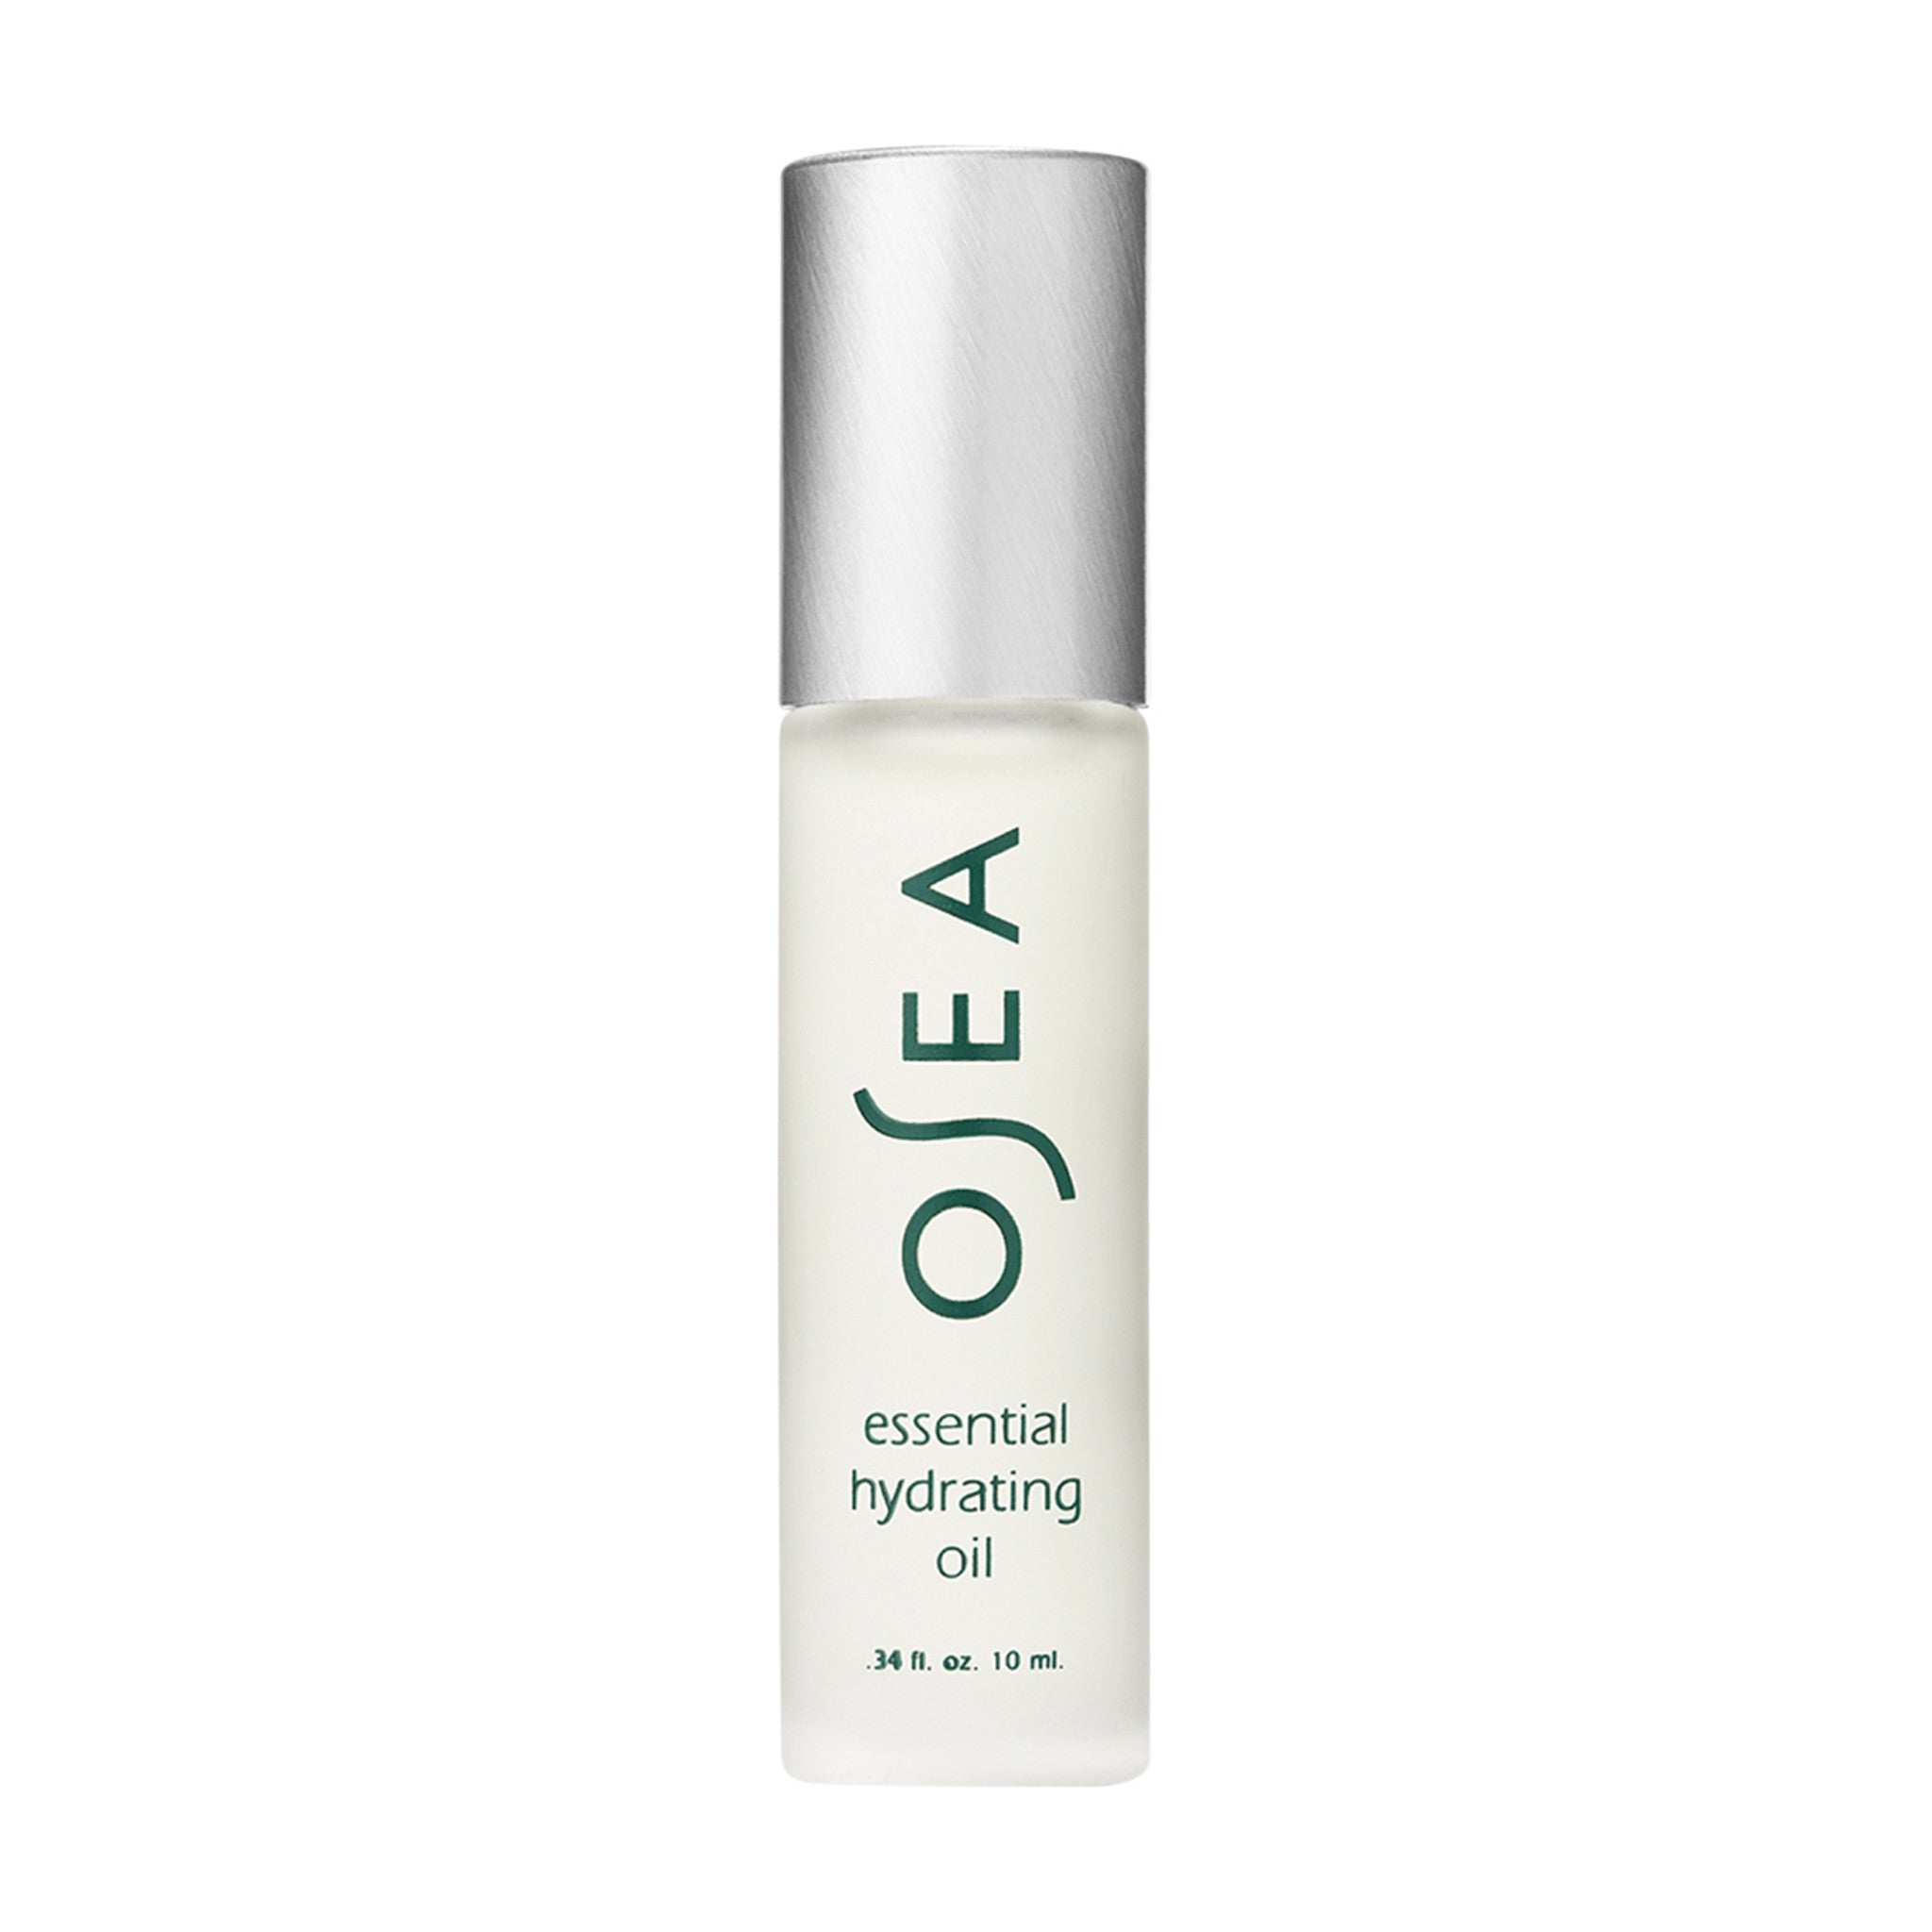 OSEA Essential Hydrating Oil main image.